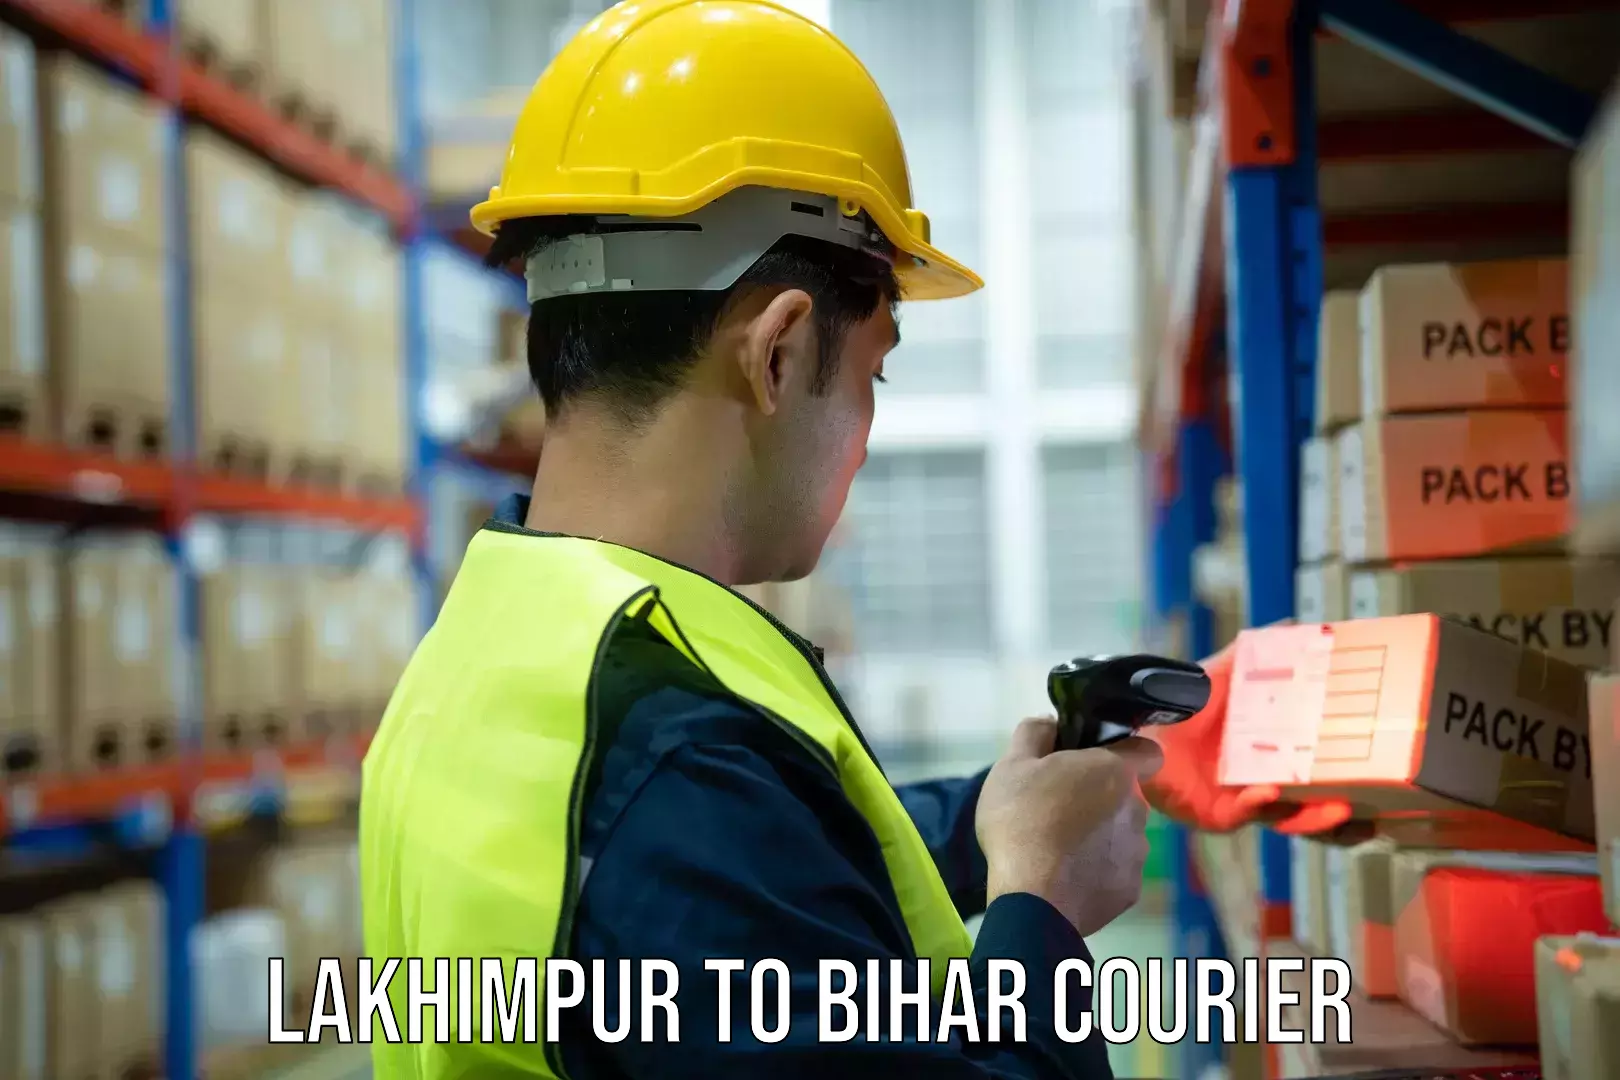 International courier networks Lakhimpur to Chainpur